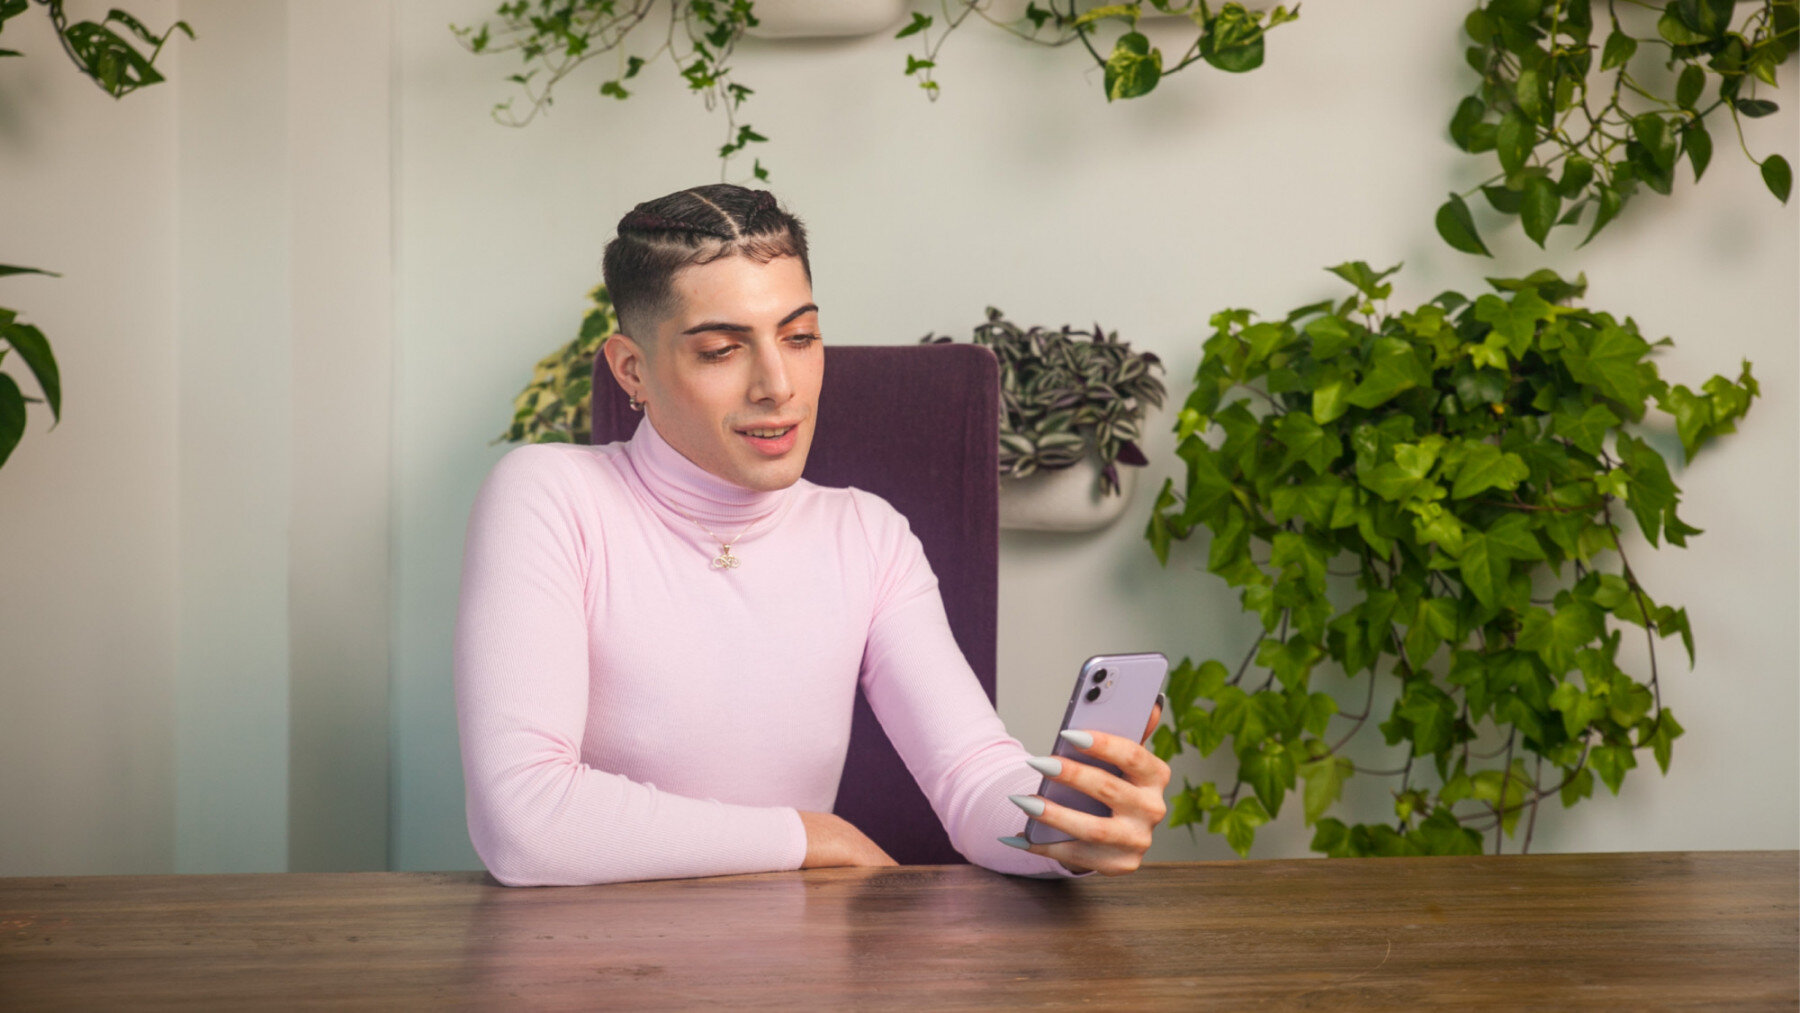 #TechReview | What does transition mean for a nonbinary person?